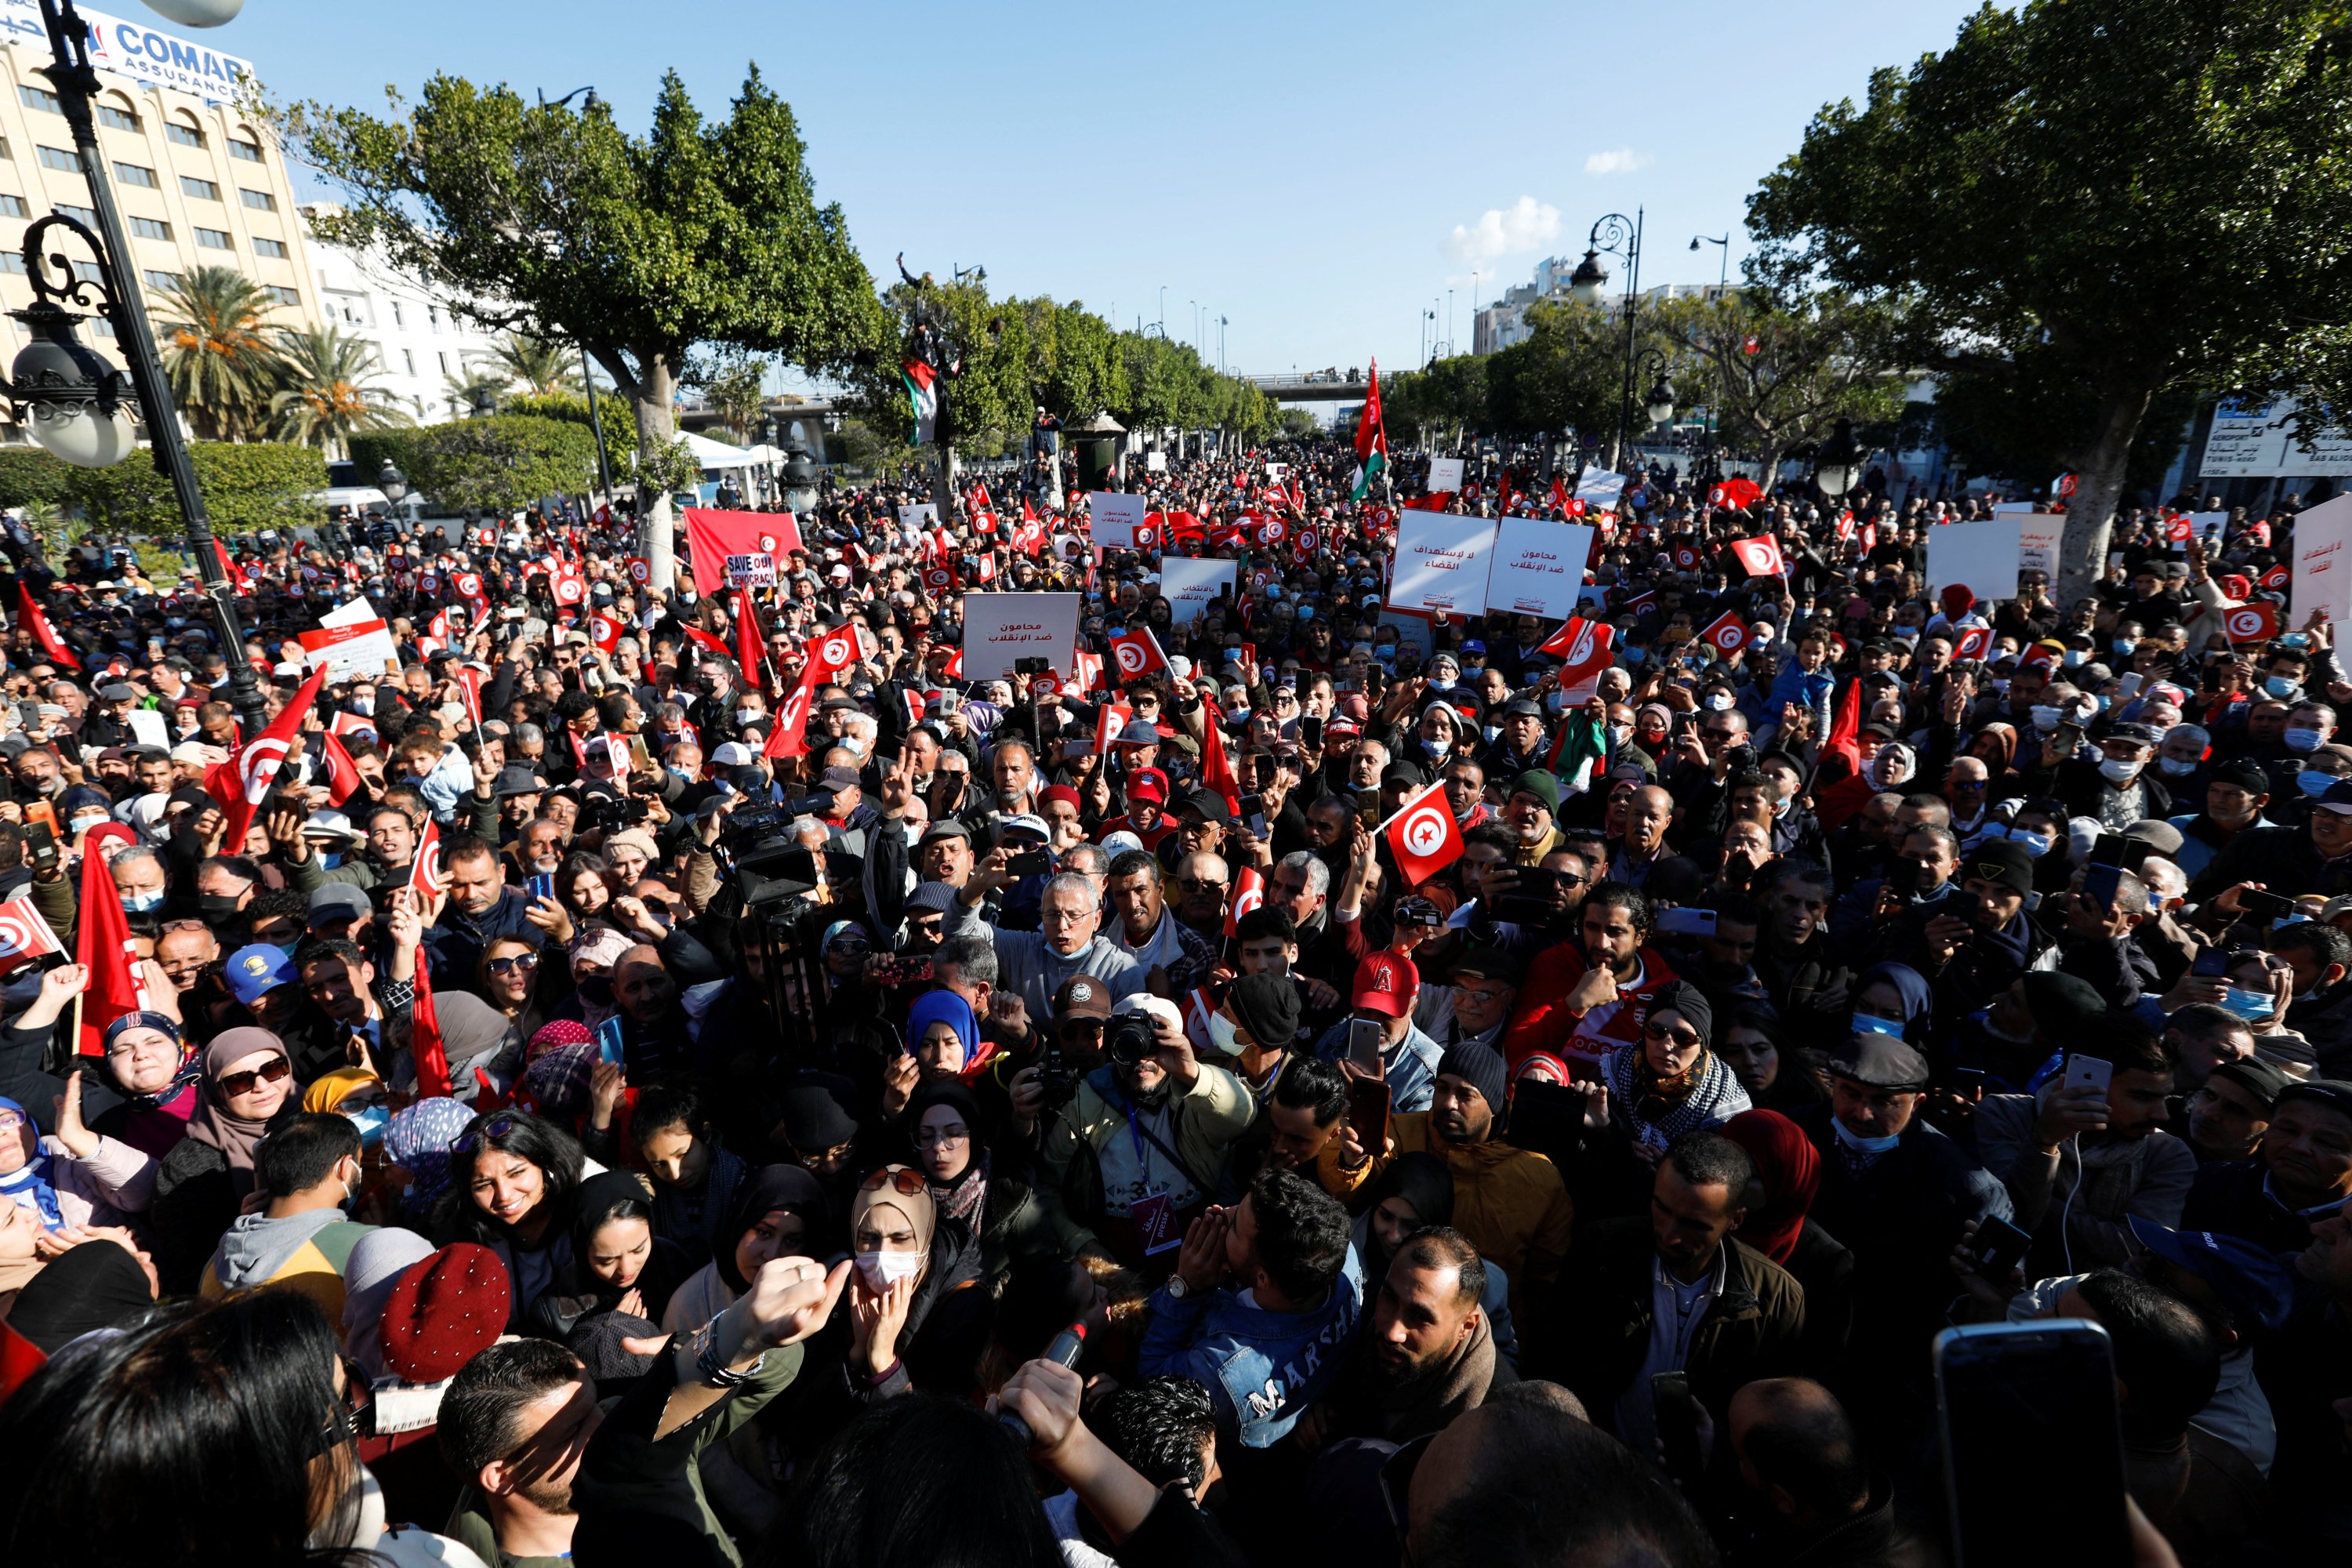 People protest against Tunisian President Kais Saied's seizure of governing power and declaration of putting a new constitution to a public referendum, in Tunis, Tunisia, Dec. 17, 2021. (Reuters Photo)